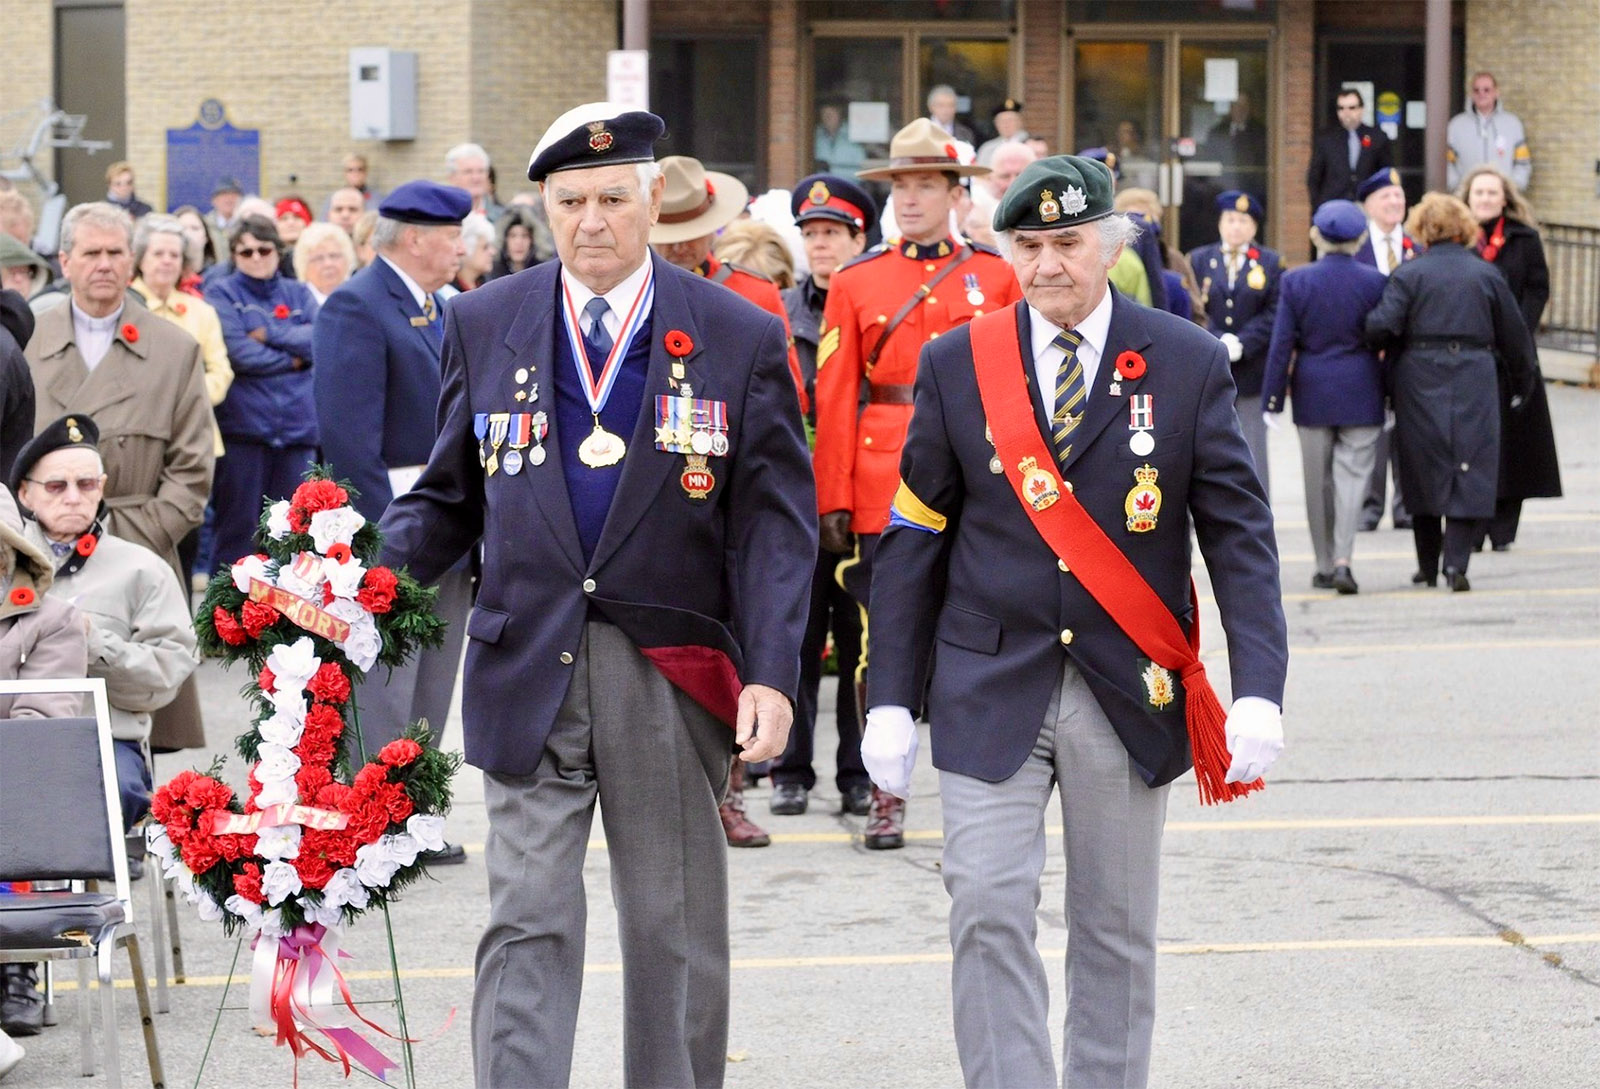 Mr. Wetherall (left) lays a wreath at a modern-era Remembrance Day ceremony.

